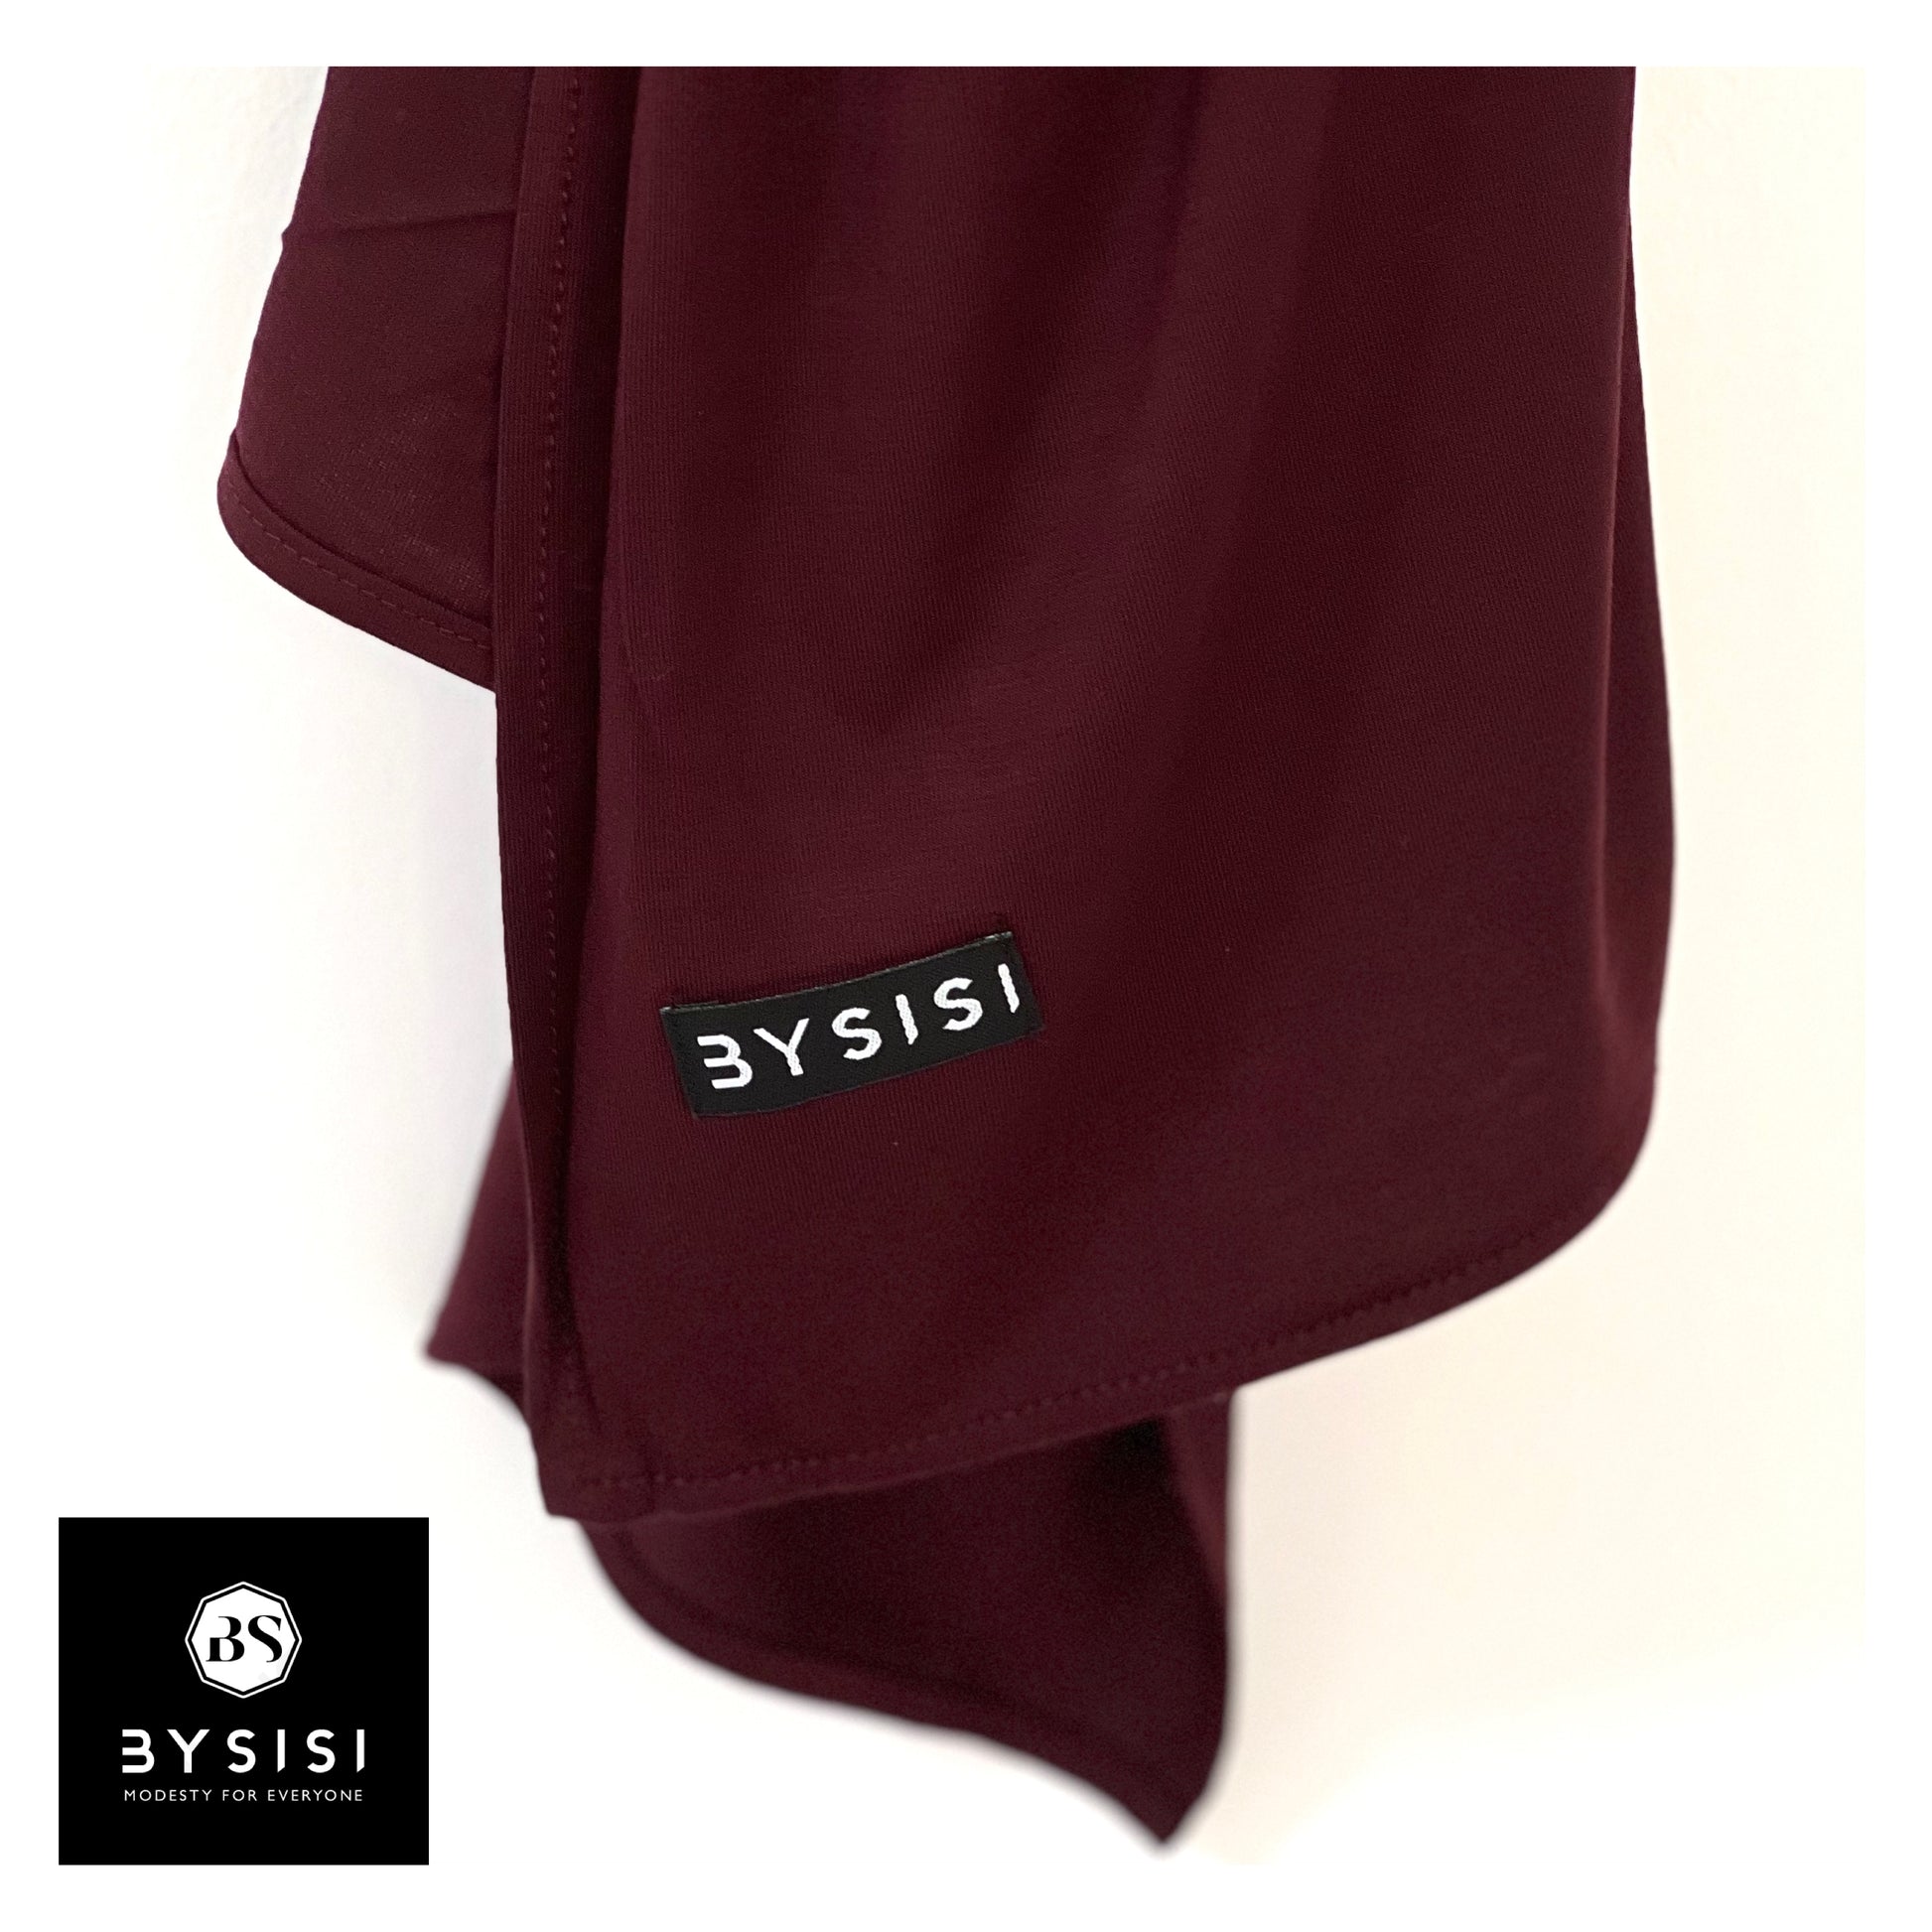 Bamboo Jersey in Aubergine - BYSISI